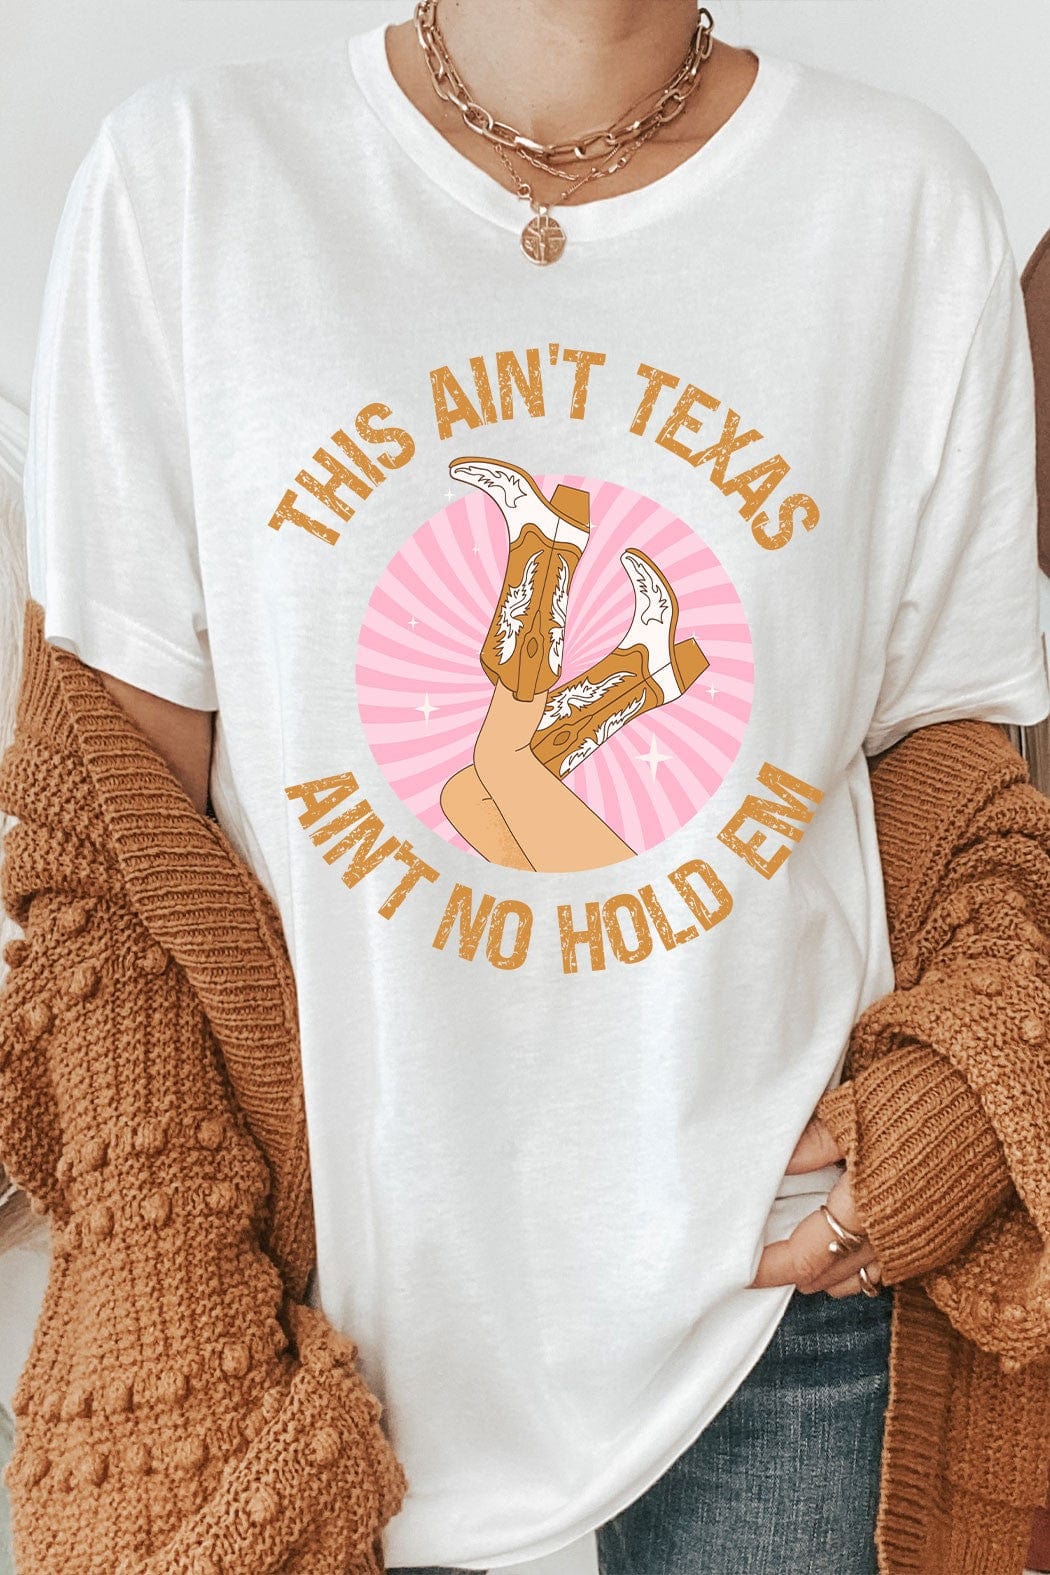 Kissed Apparel Tops - Tees This Ain't Texas Graphic Tee In White